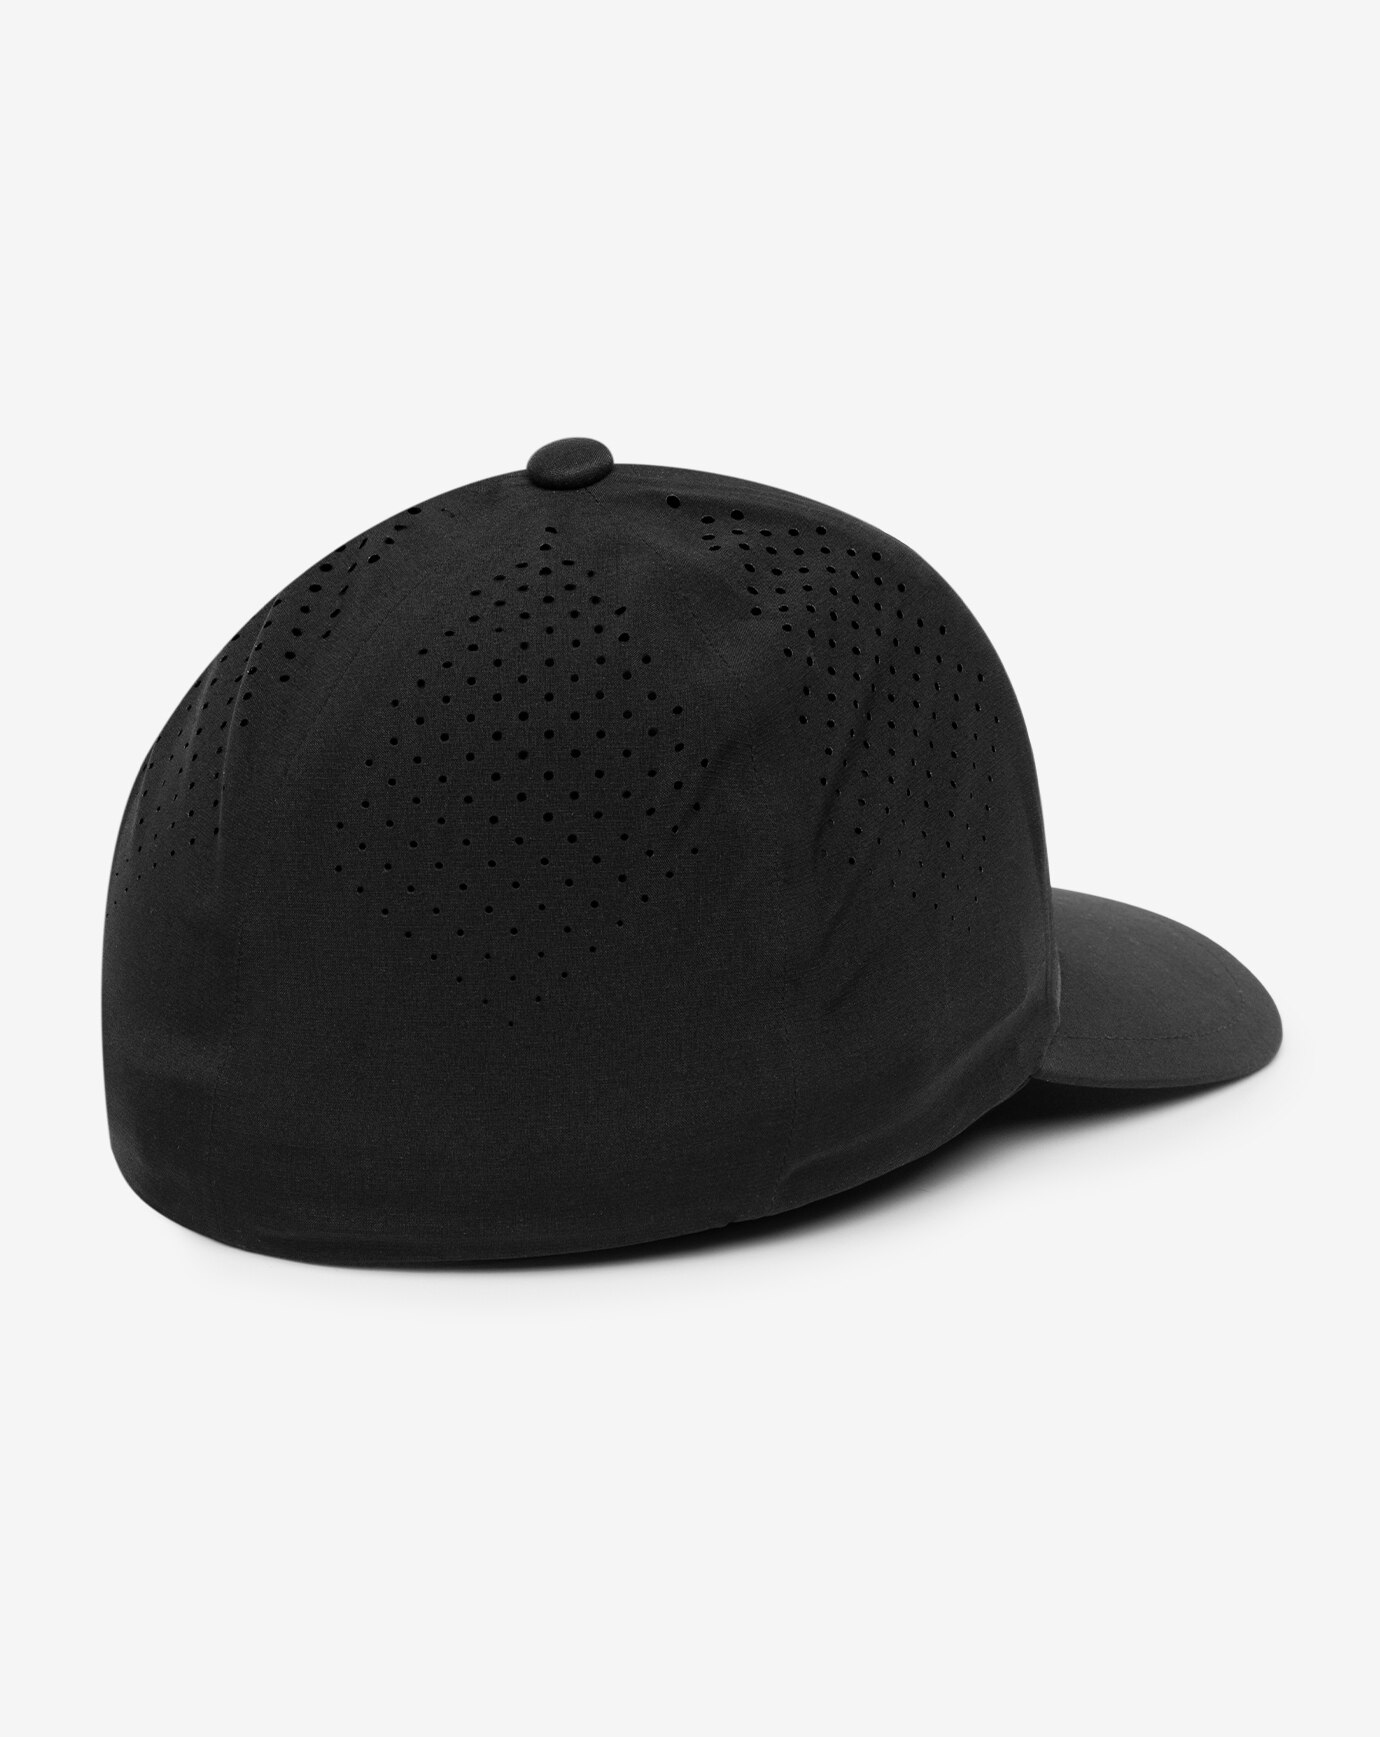 TAHONA HEATER TECH FITTED HAT Image Thumbnail 3